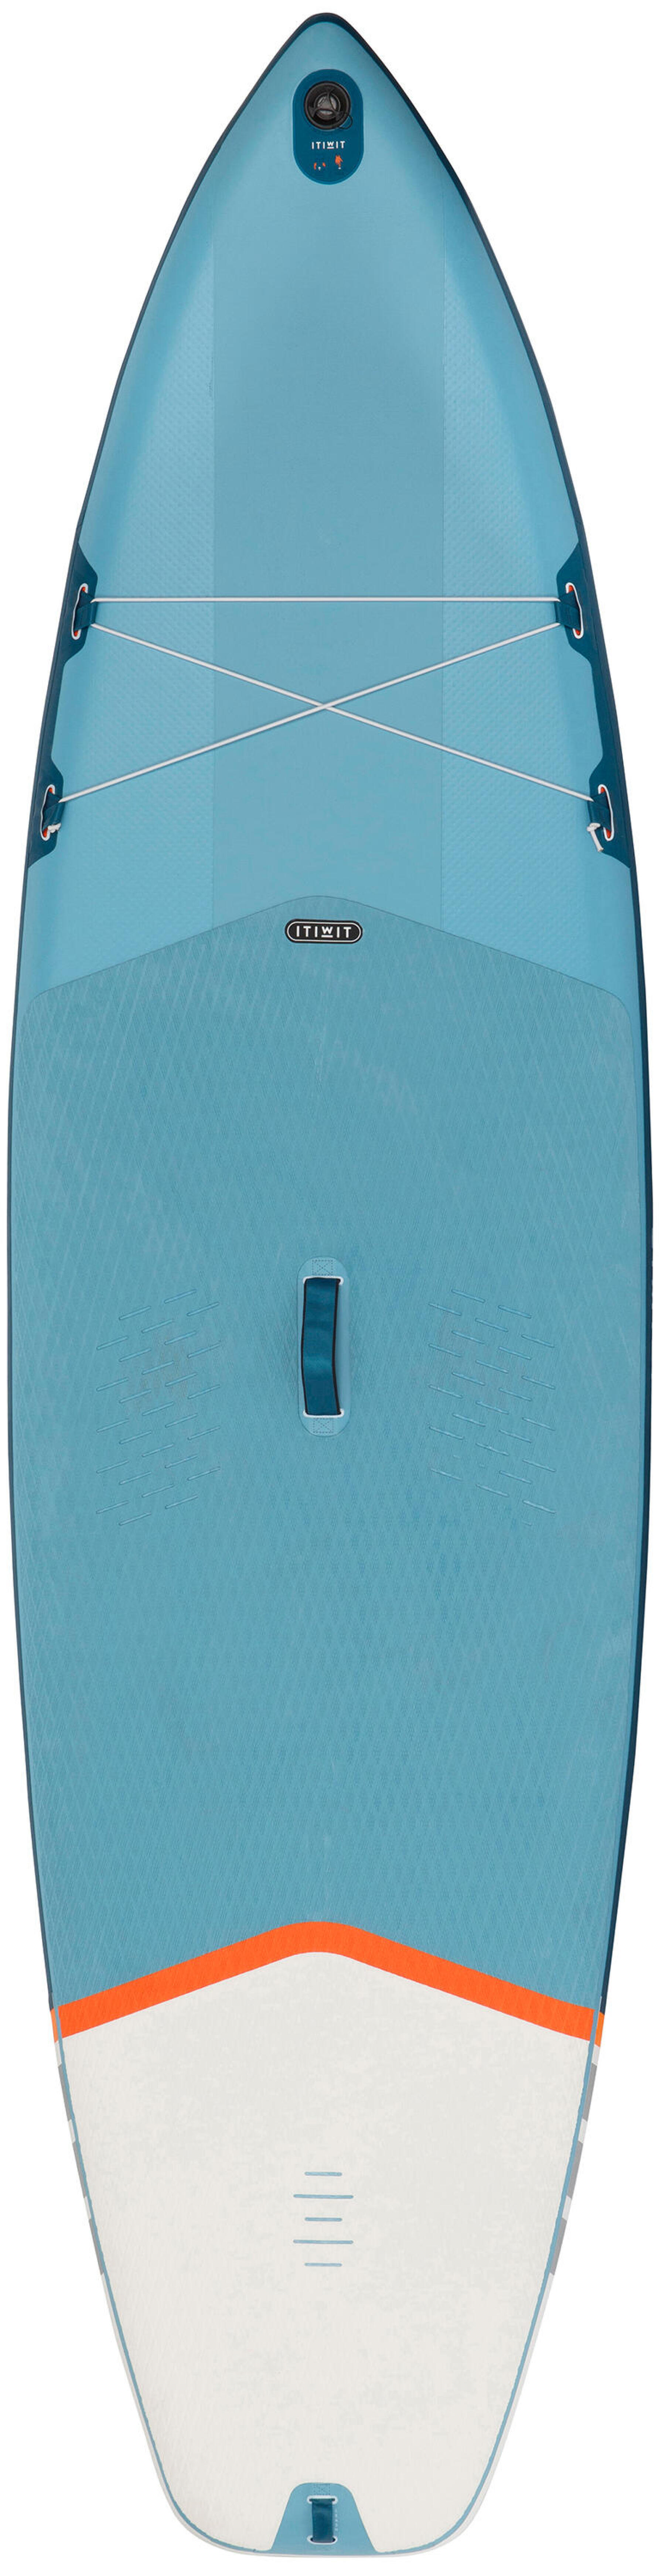 itiwit-inflatable-x100-sup-11-blue-decathlon